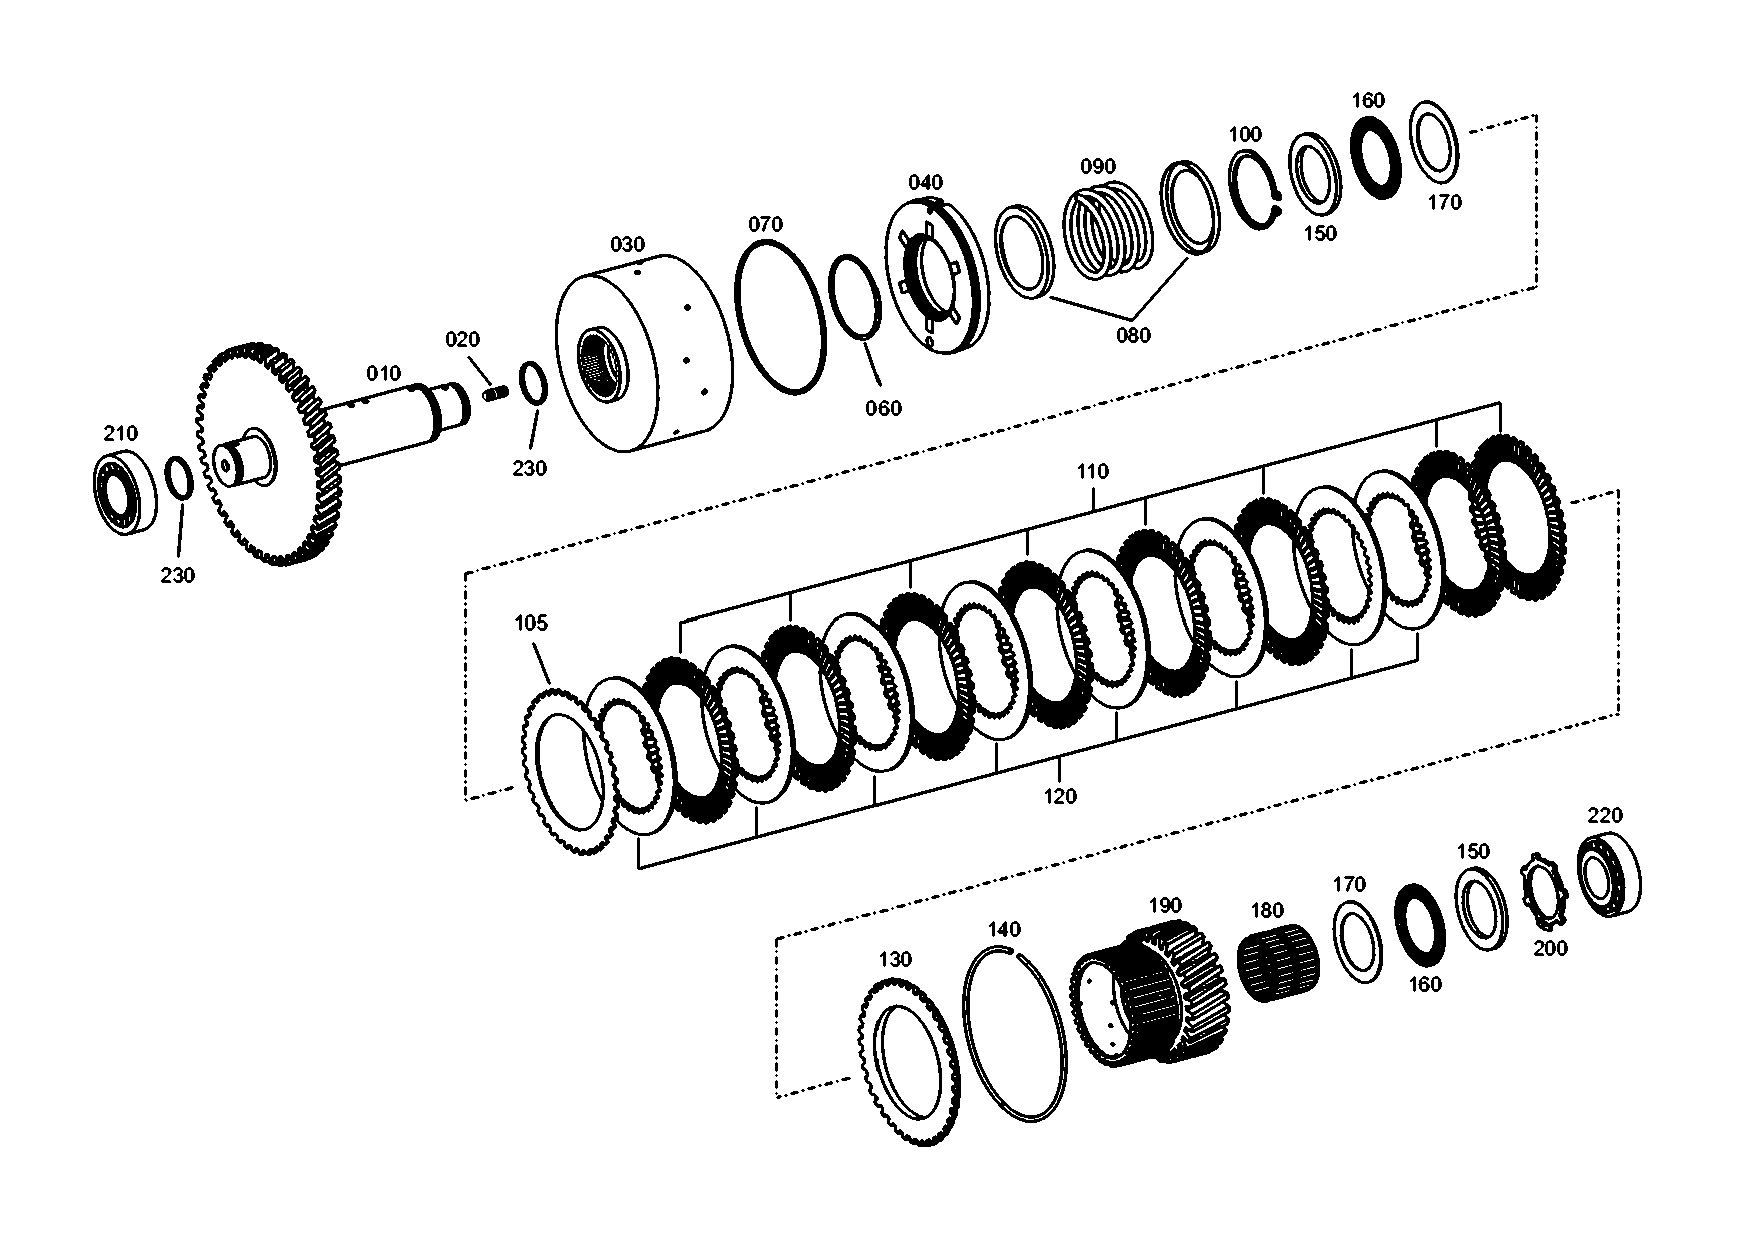 drawing for PPM 6089145 - I.CLUTCH DISC (figure 1)